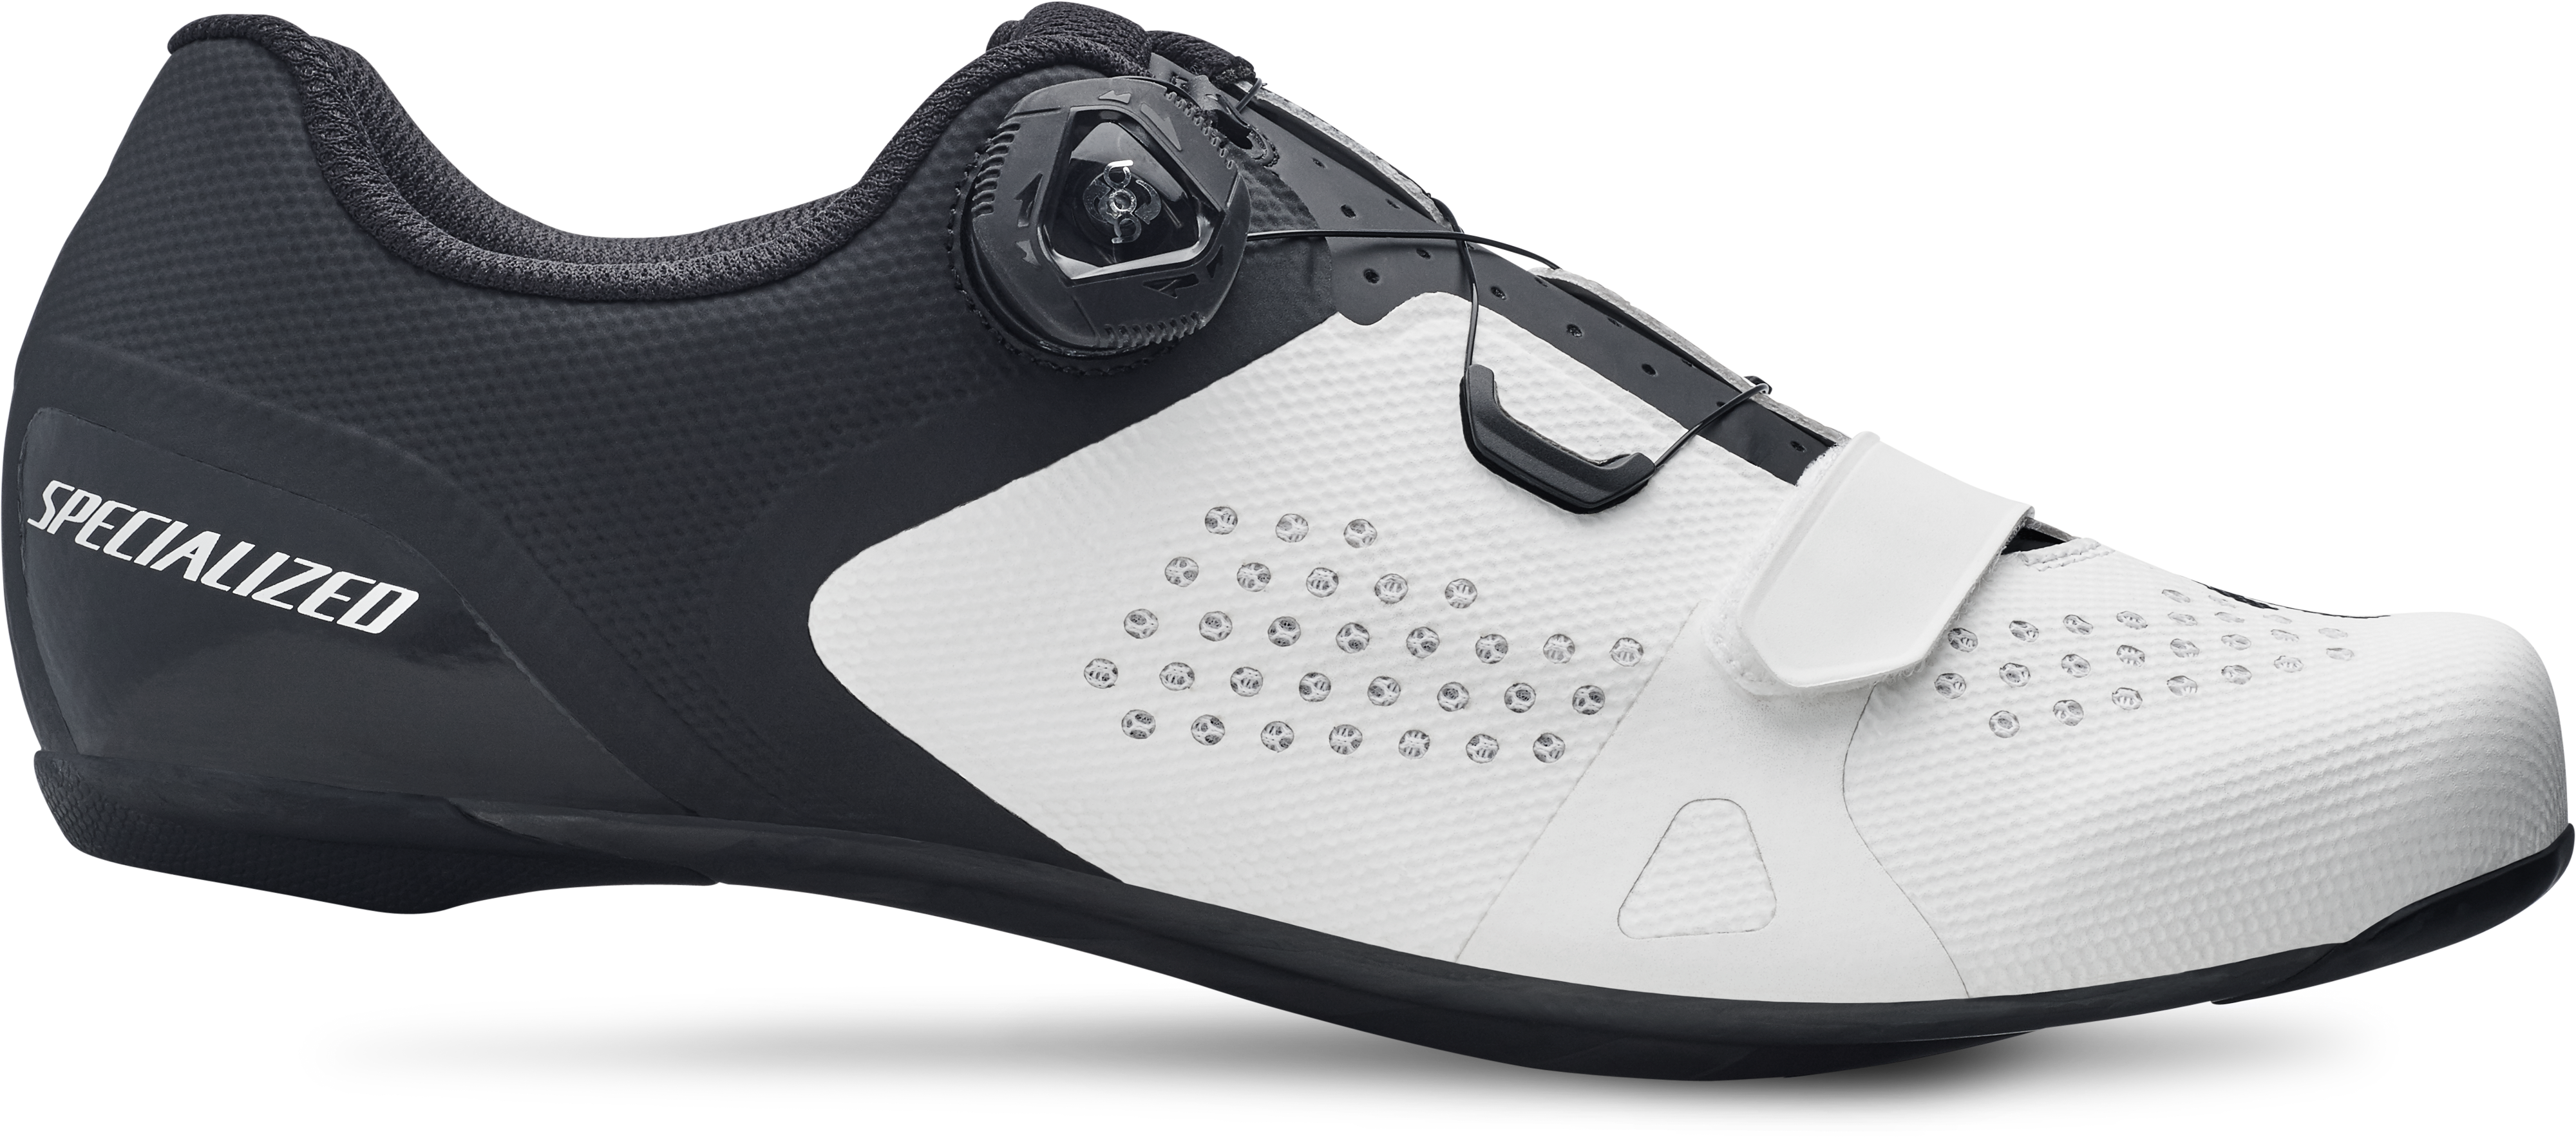 SPECIALIZED couvre-chaussures lycra 2018 CYCLES ET SPORTS